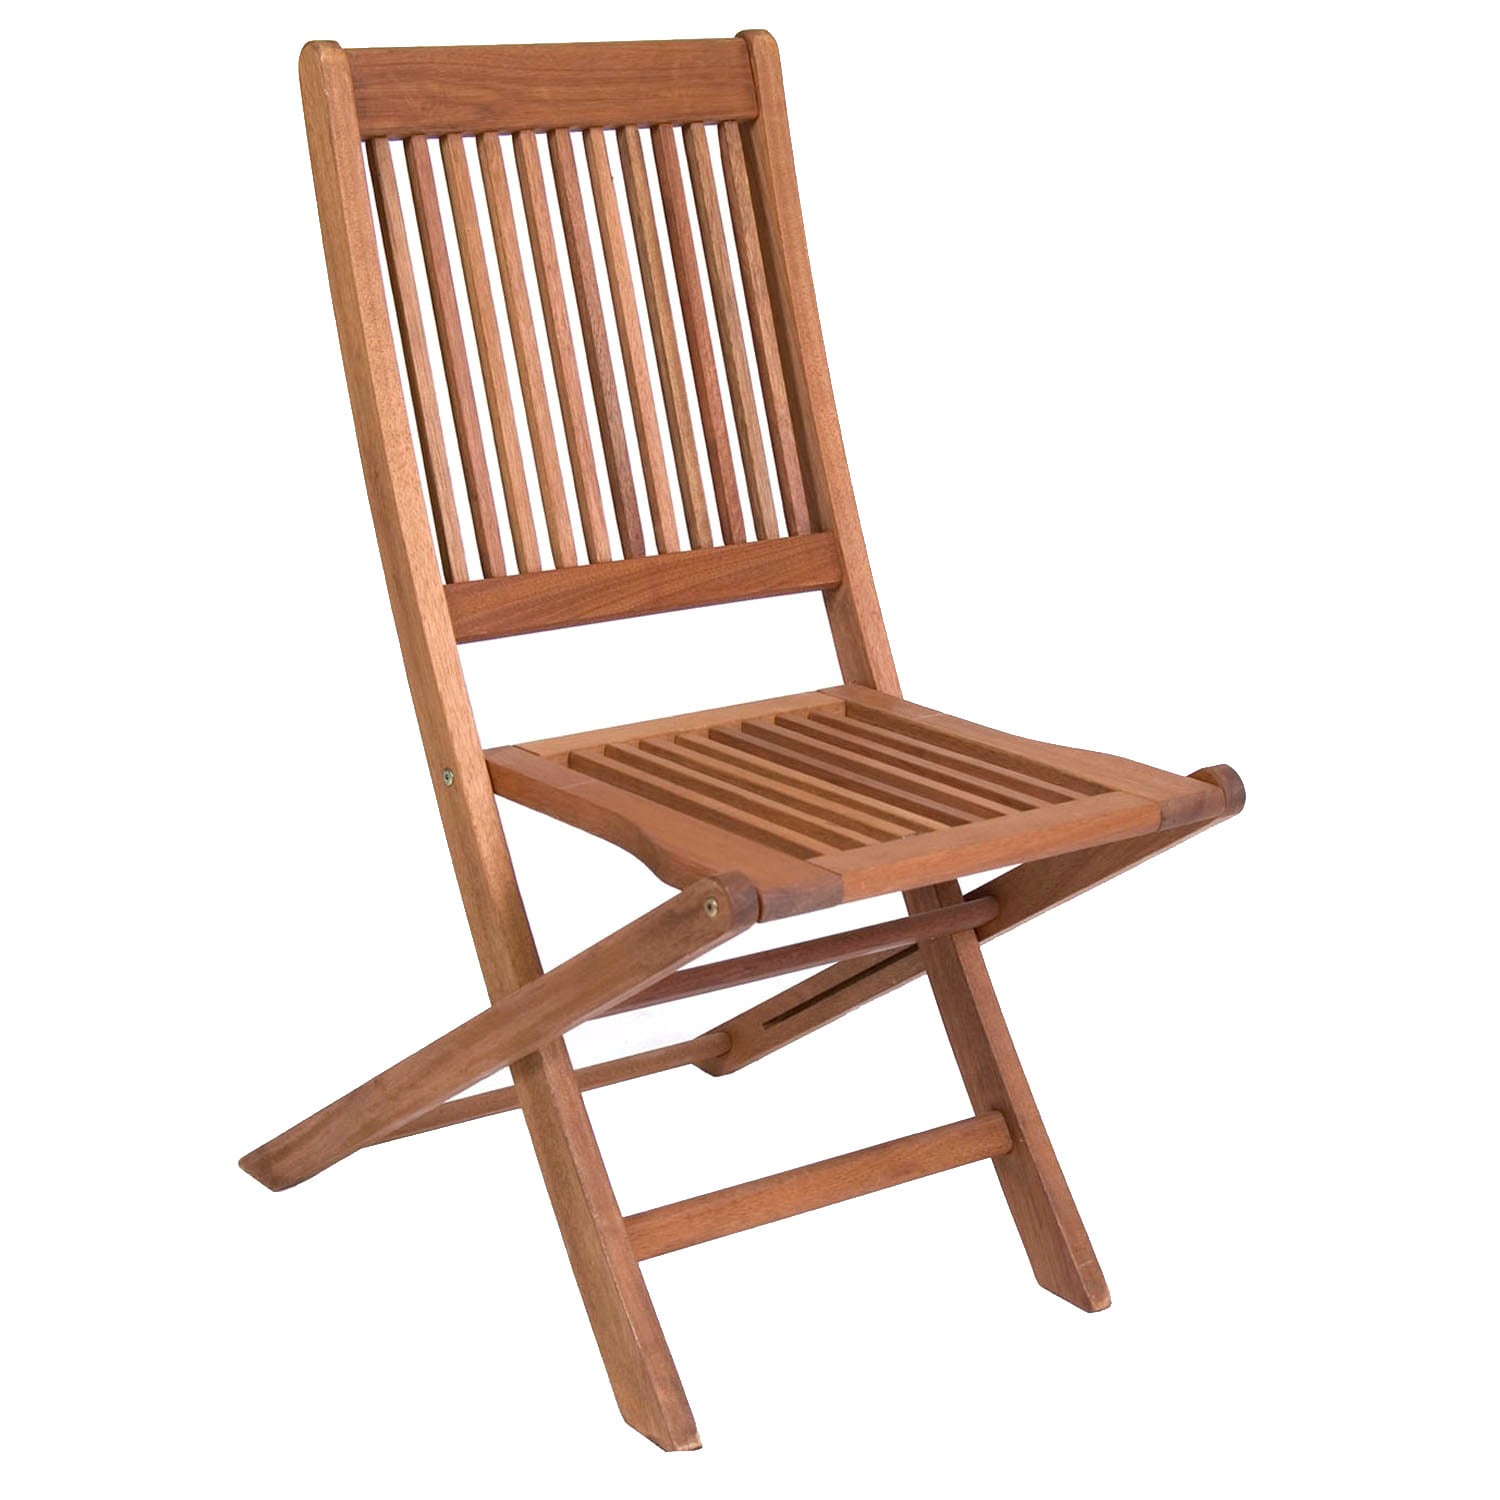 Folding Chair (Set of 2) Today $153.99 4.6 (8 reviews)